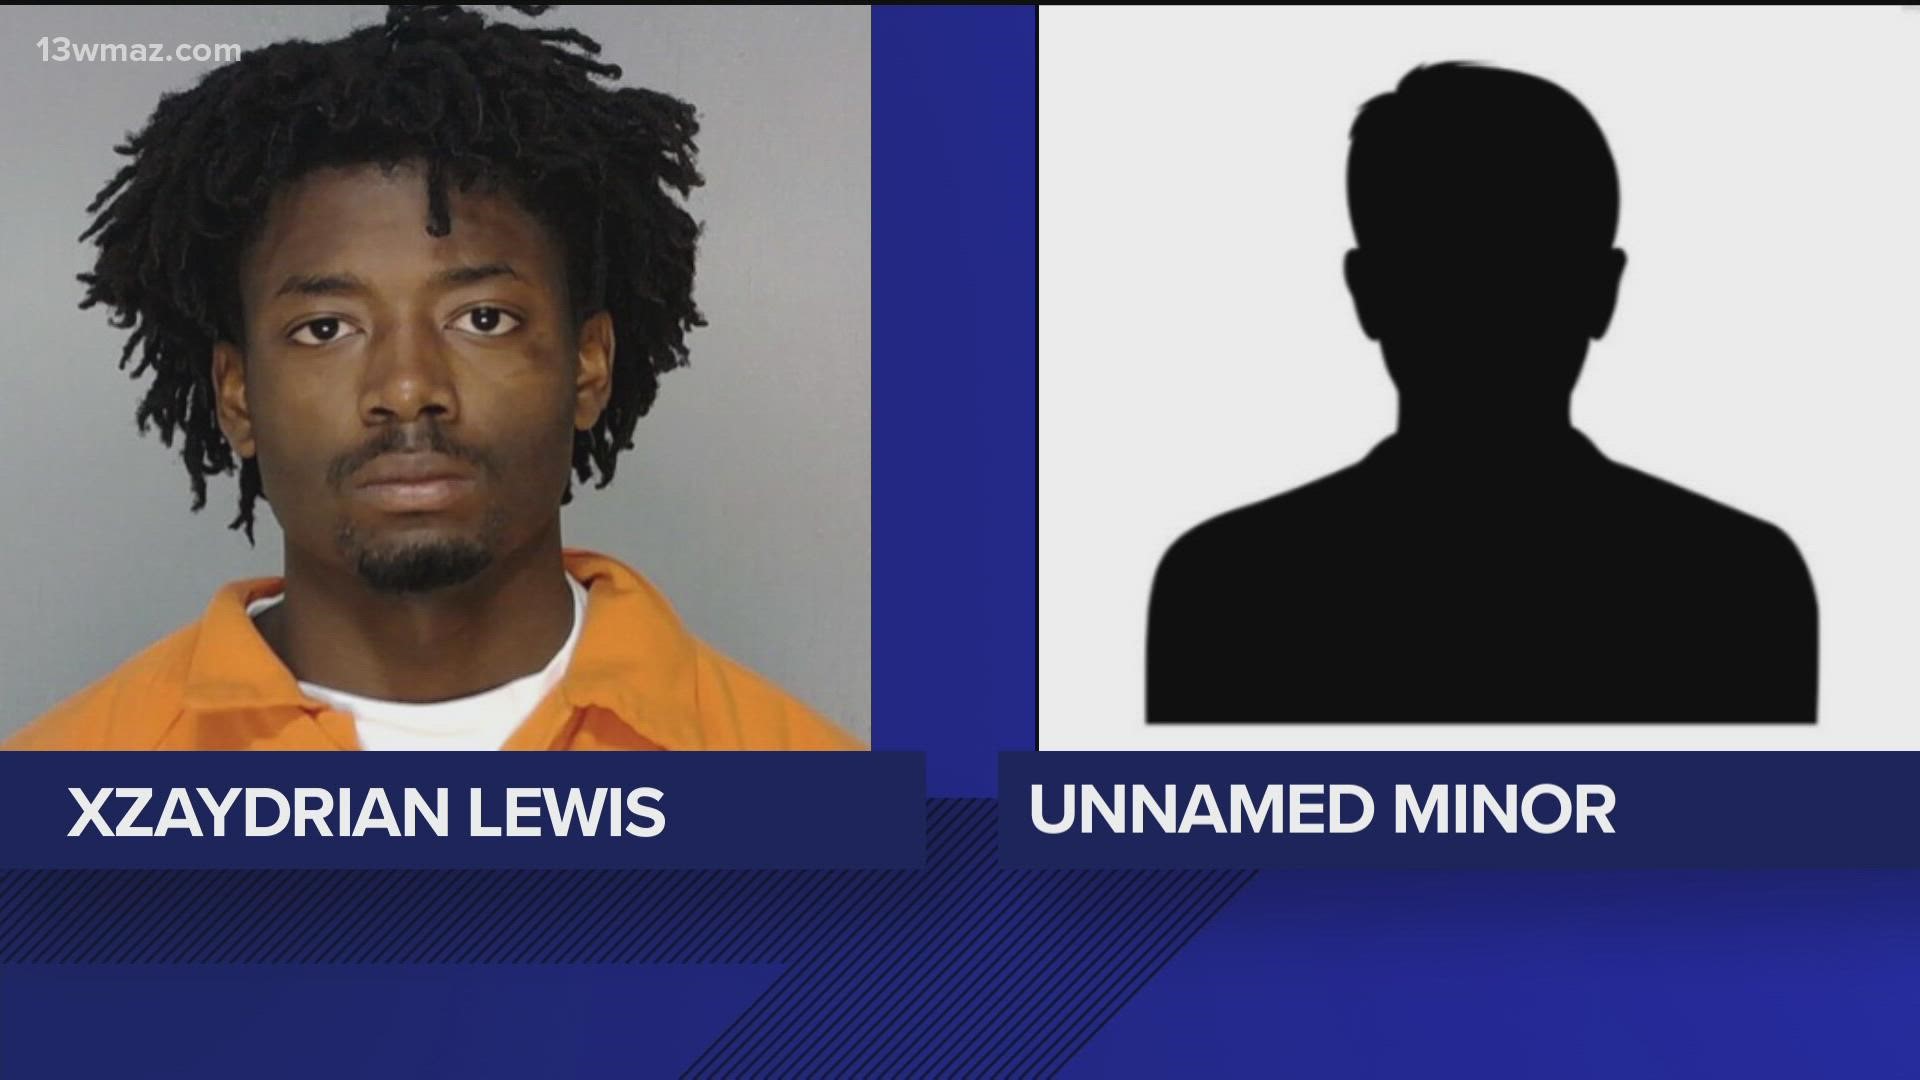 According to a news release, investigators identified 18-year-old Xzaydrian Ja’Won Lewis and a 16-year-old boy as the two suspects in the shooting.